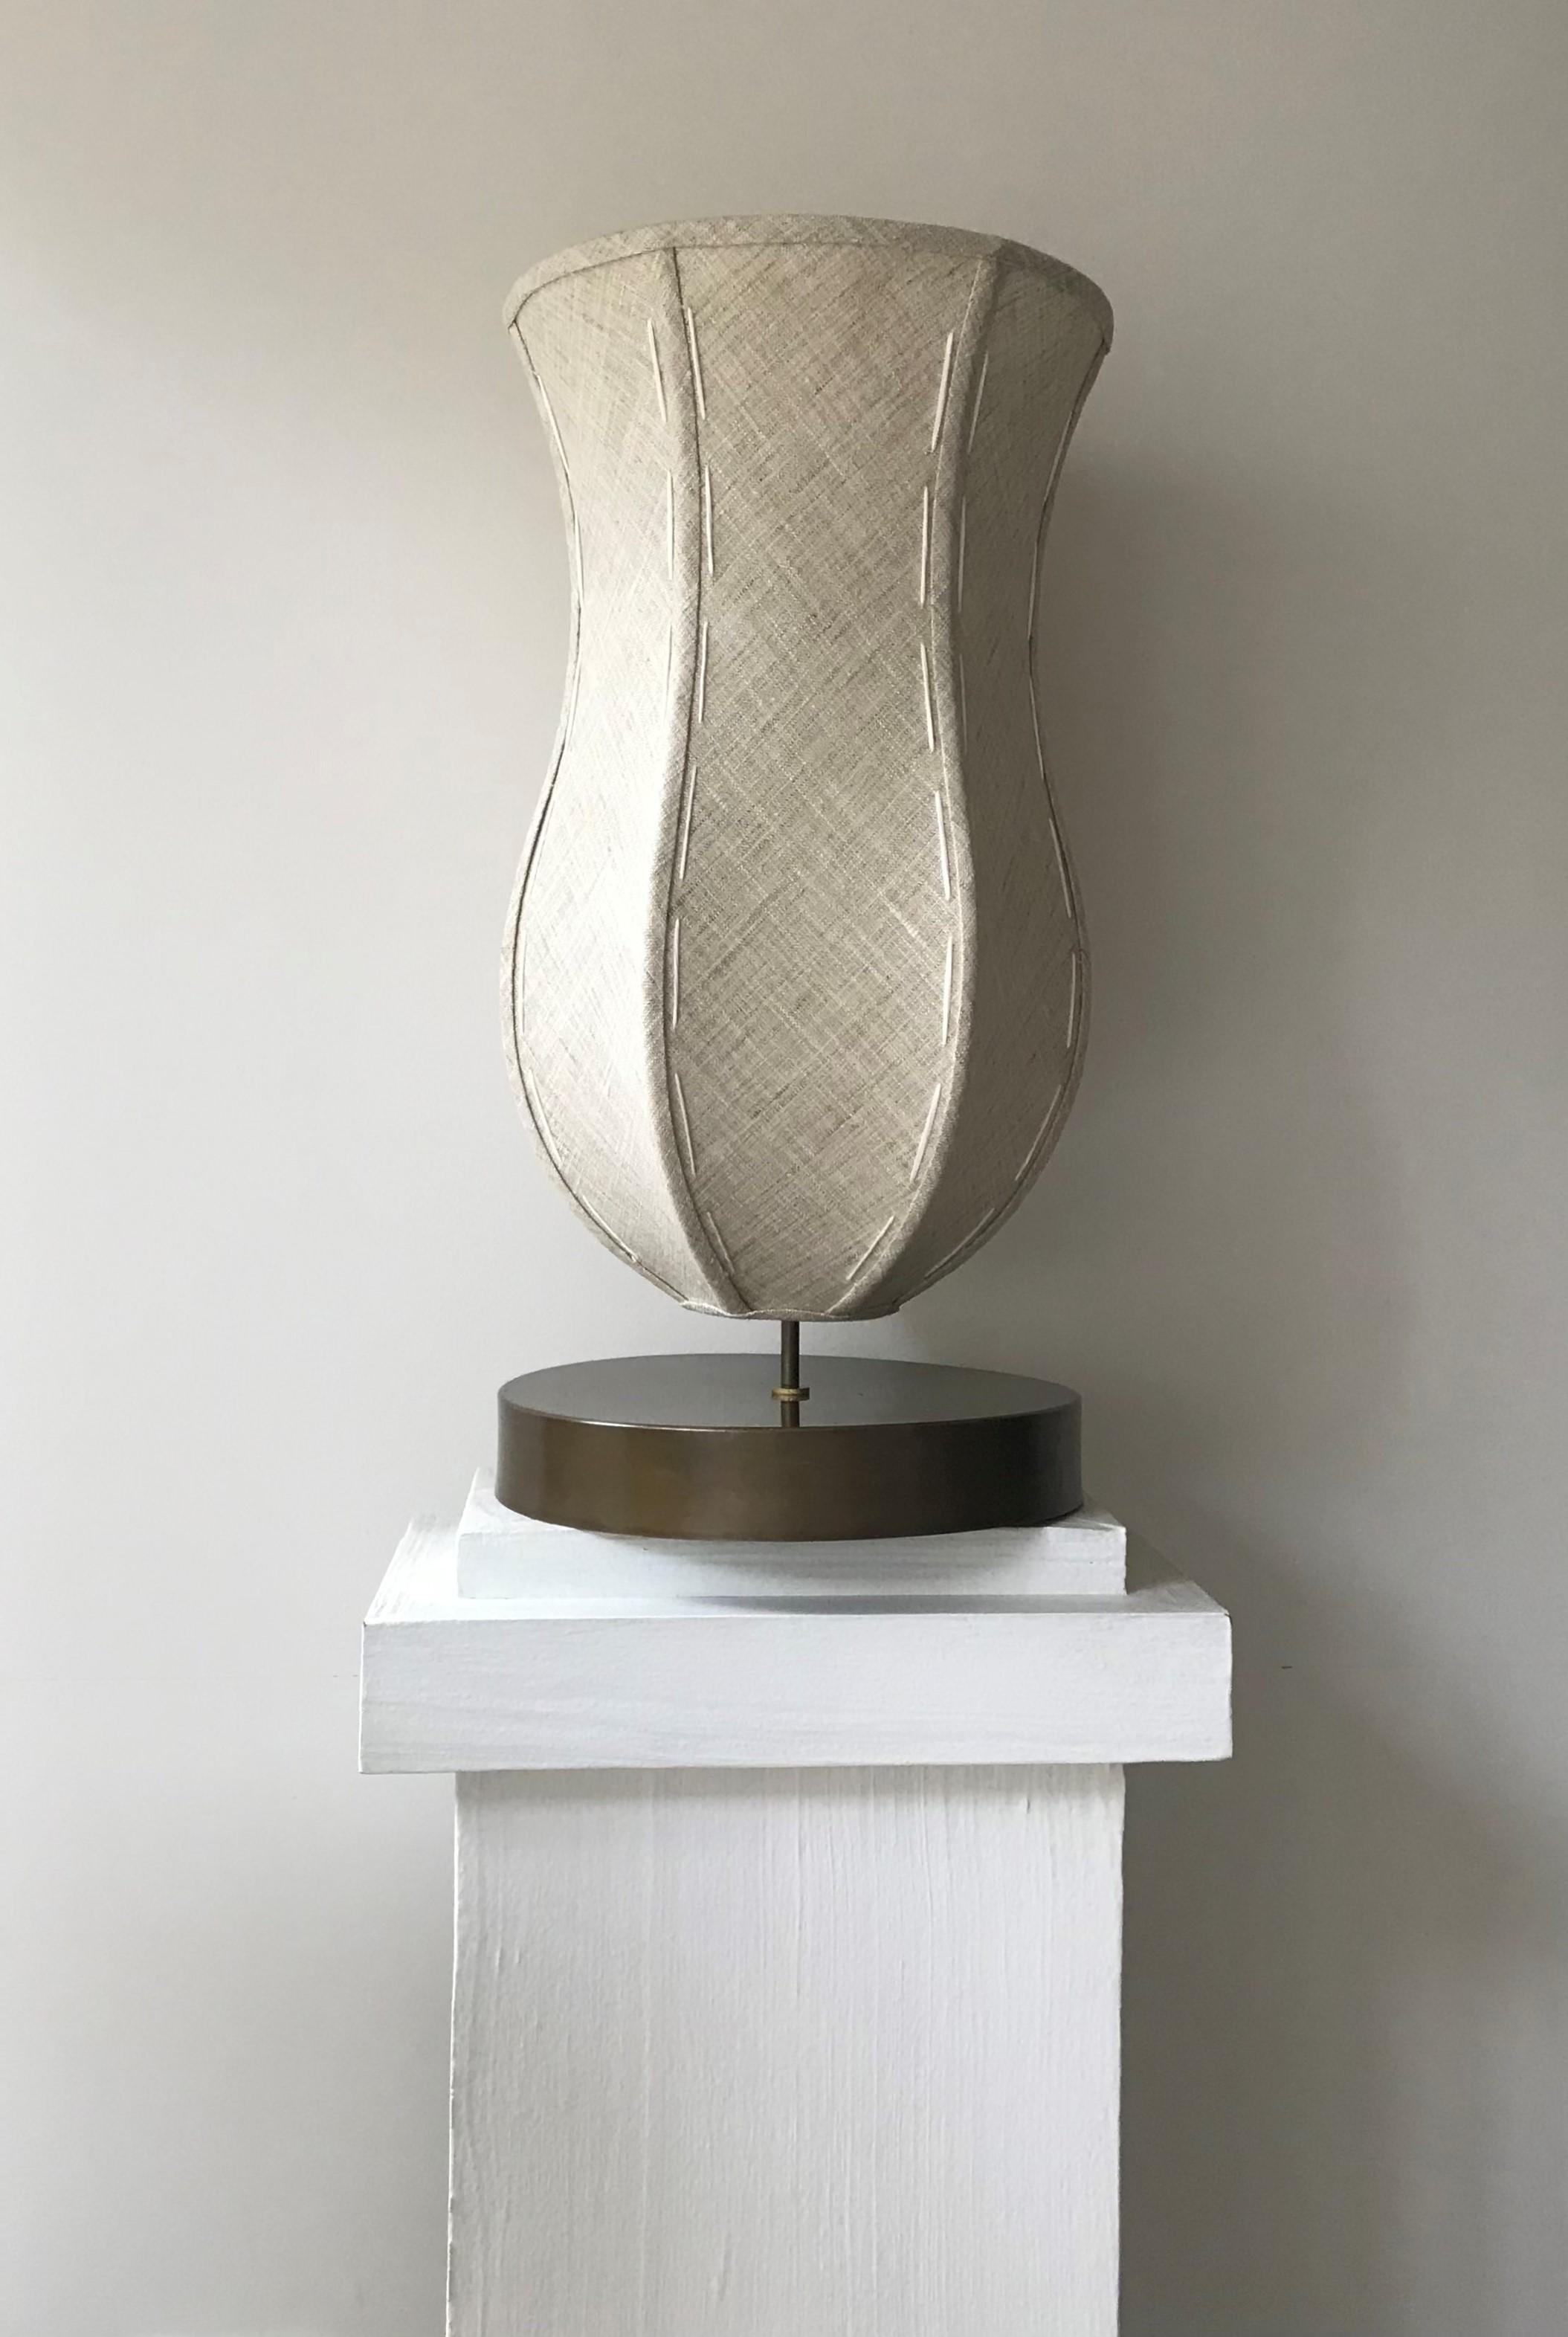 Tulip Lamp is a versatile example of organic modern design that refers to early 20th century Cubism and nature. Made originally in multiples for an AD International 100 project, Tulip Lamp provides useful light levels and a highly decorative curved,